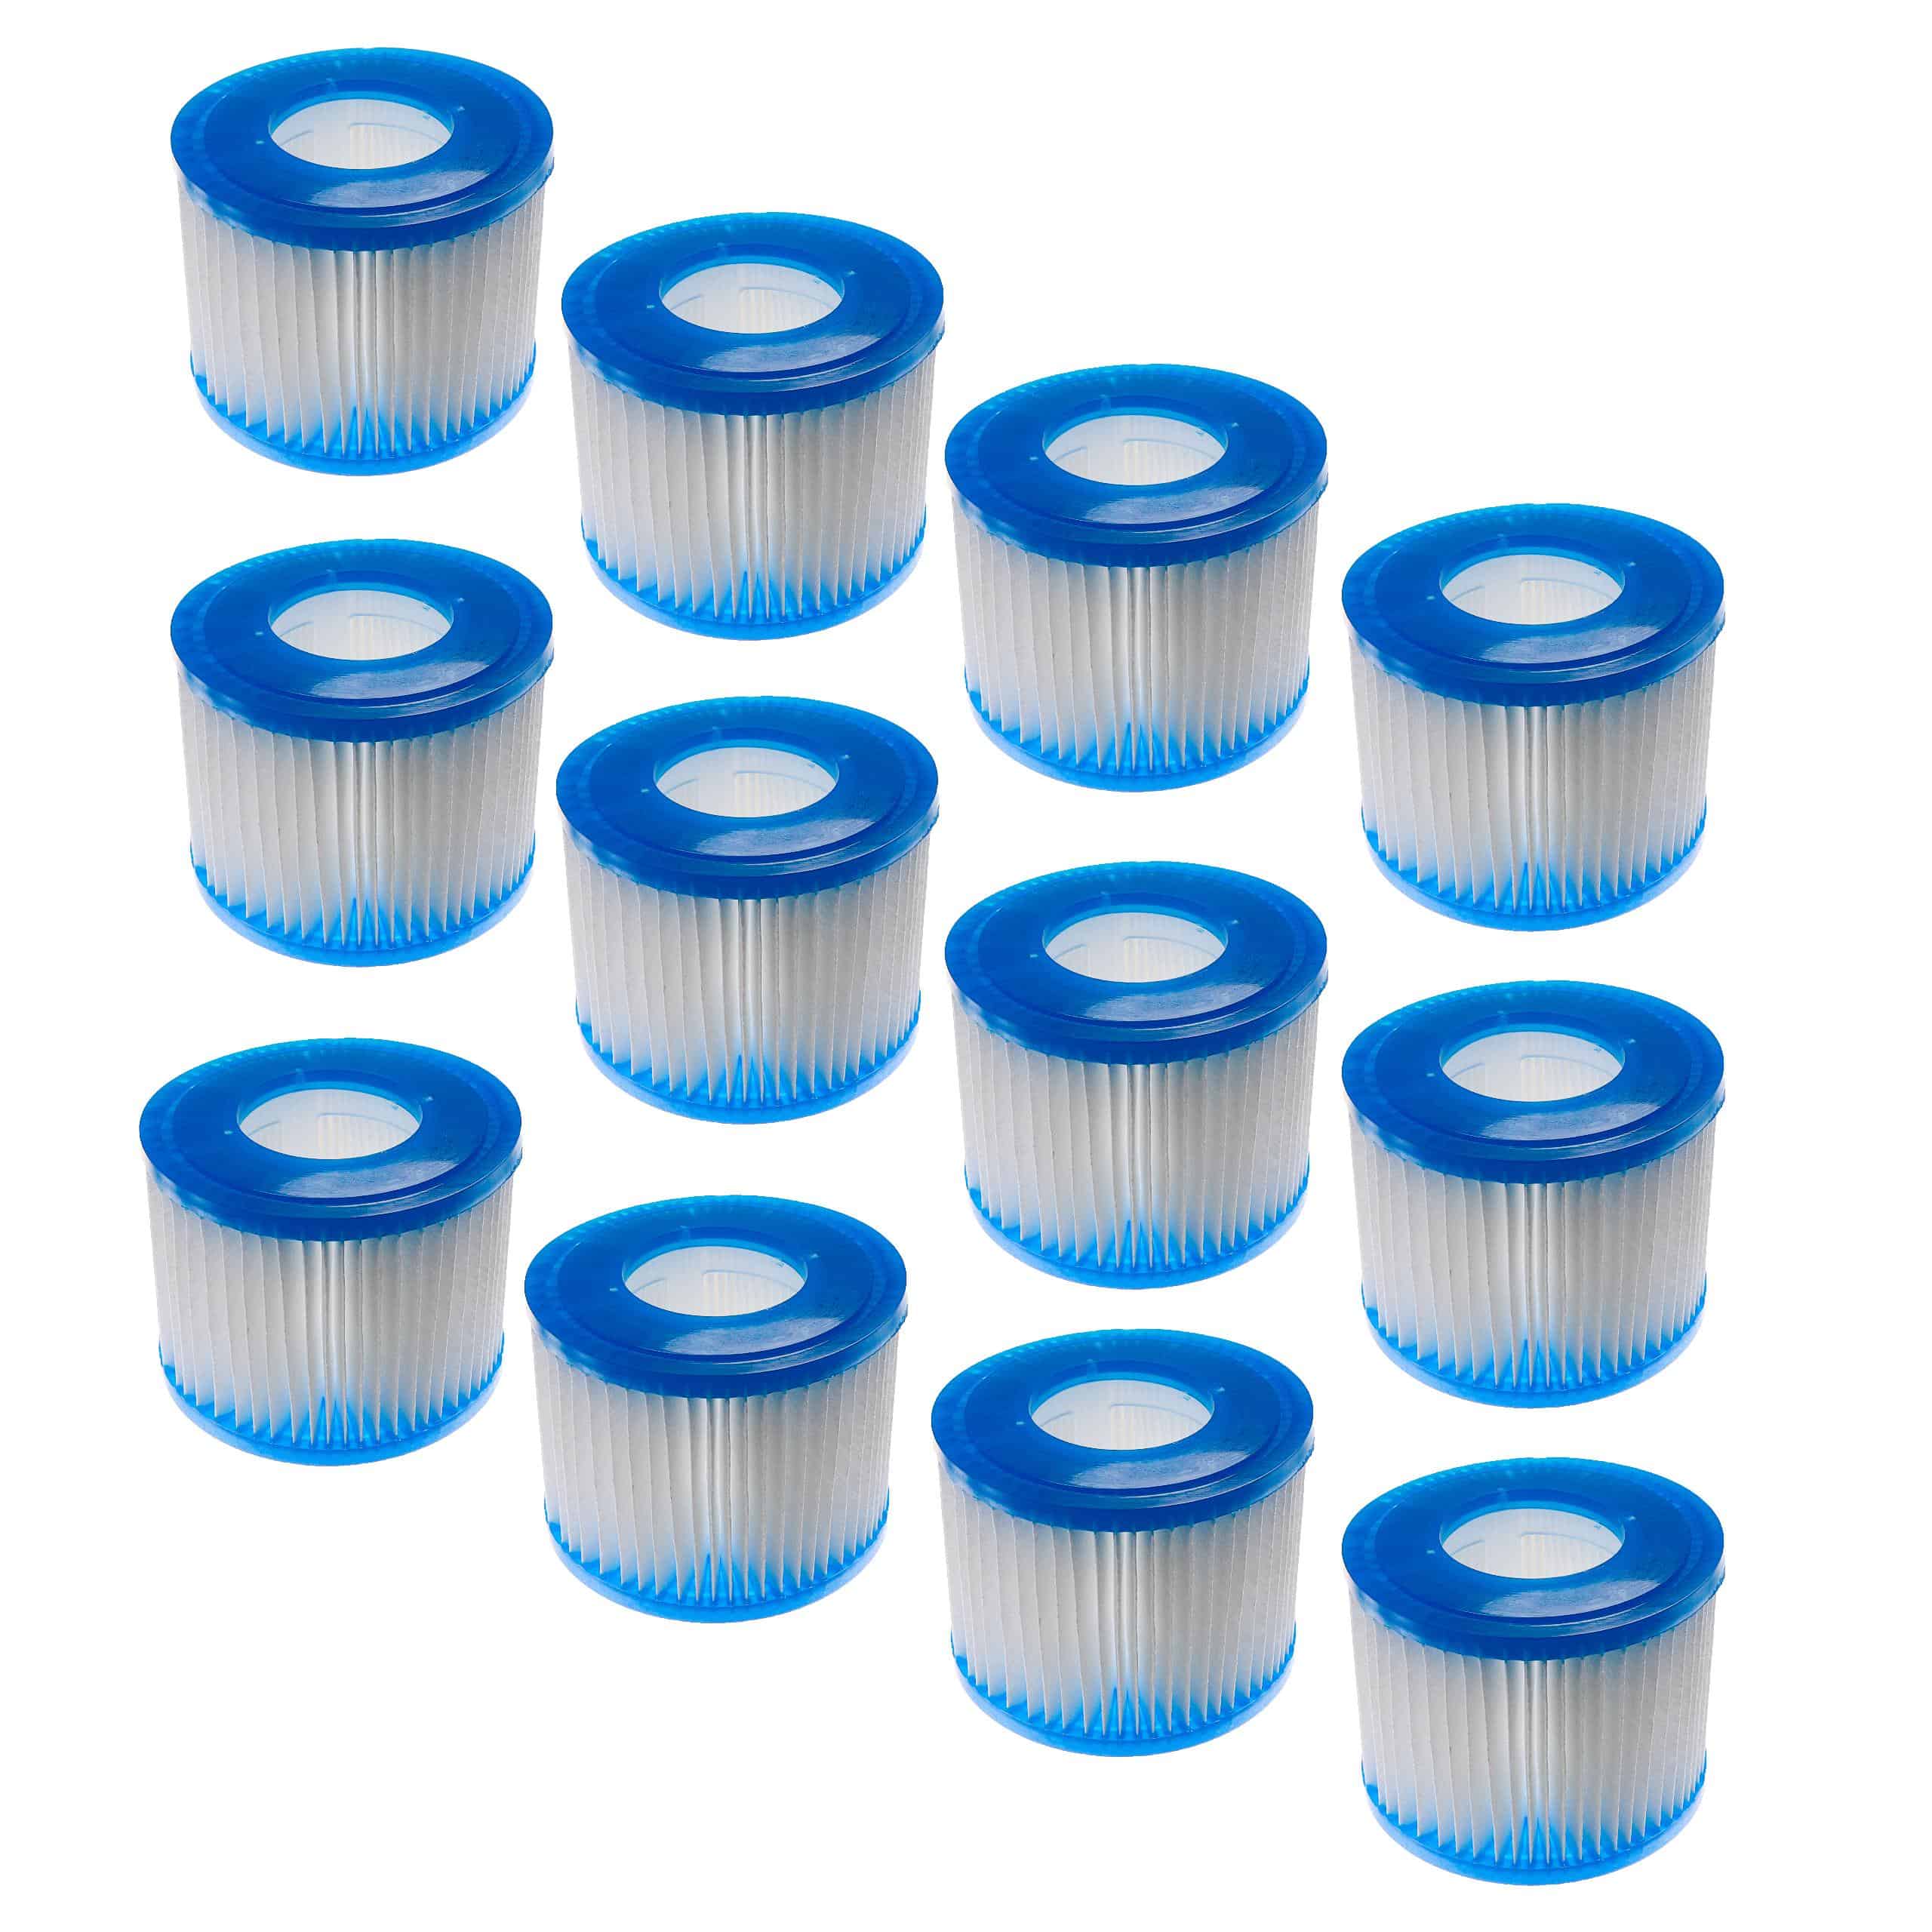 12x Pool Filter Type VI as Replacement for Bestway Typ VI, FD2134 - Filter Cartridge